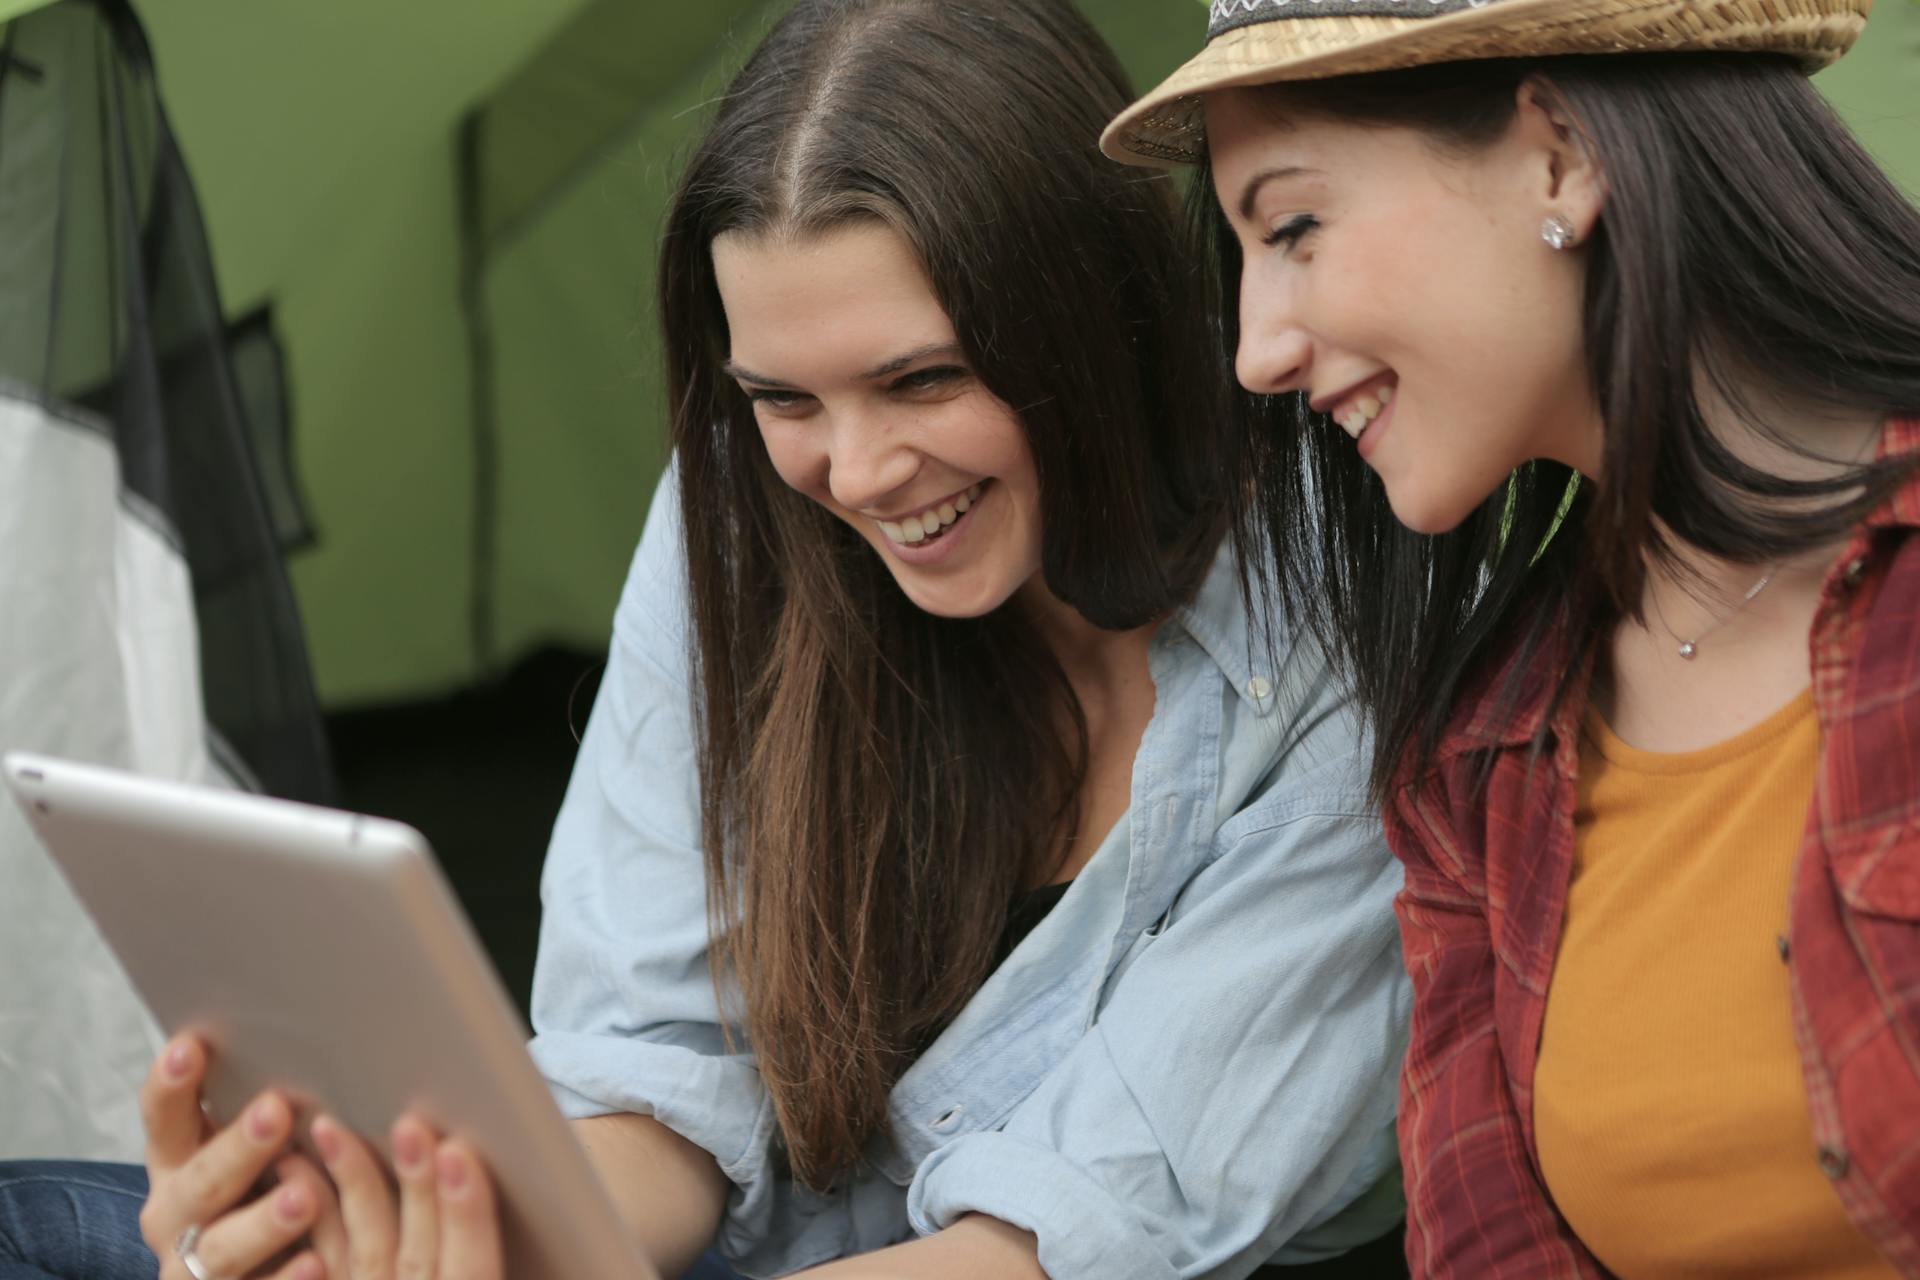 Two women smiling while looking at an iPad | Source: Pexels